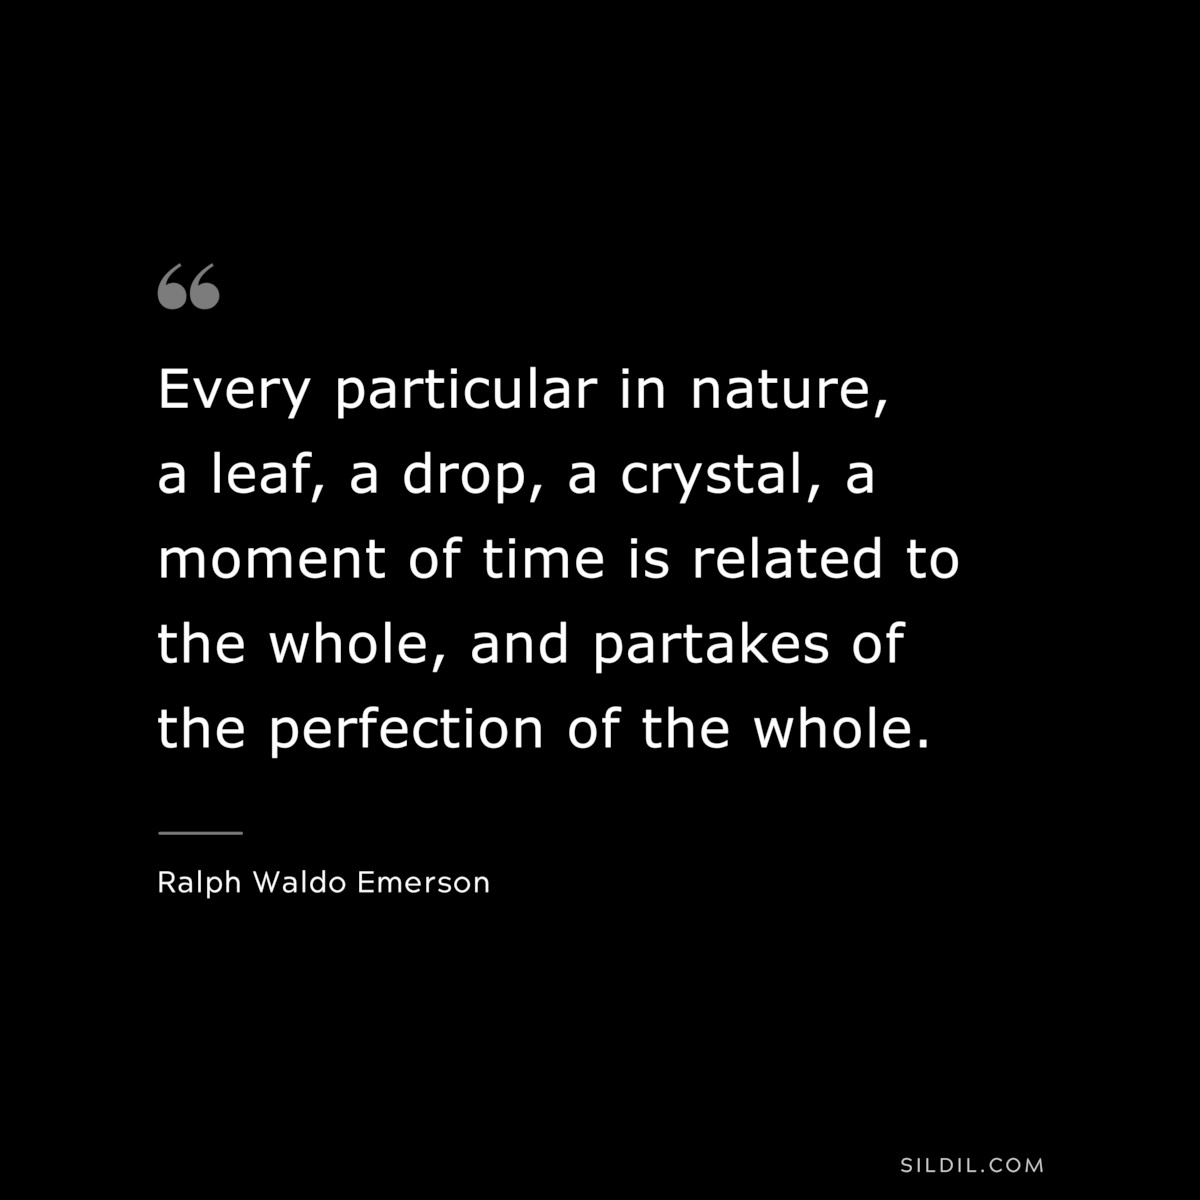 Every particular in nature, a leaf, a drop, a crystal, a moment of time is related to the whole, and partakes of the perfection of the whole. — Ralph Waldo Emerson